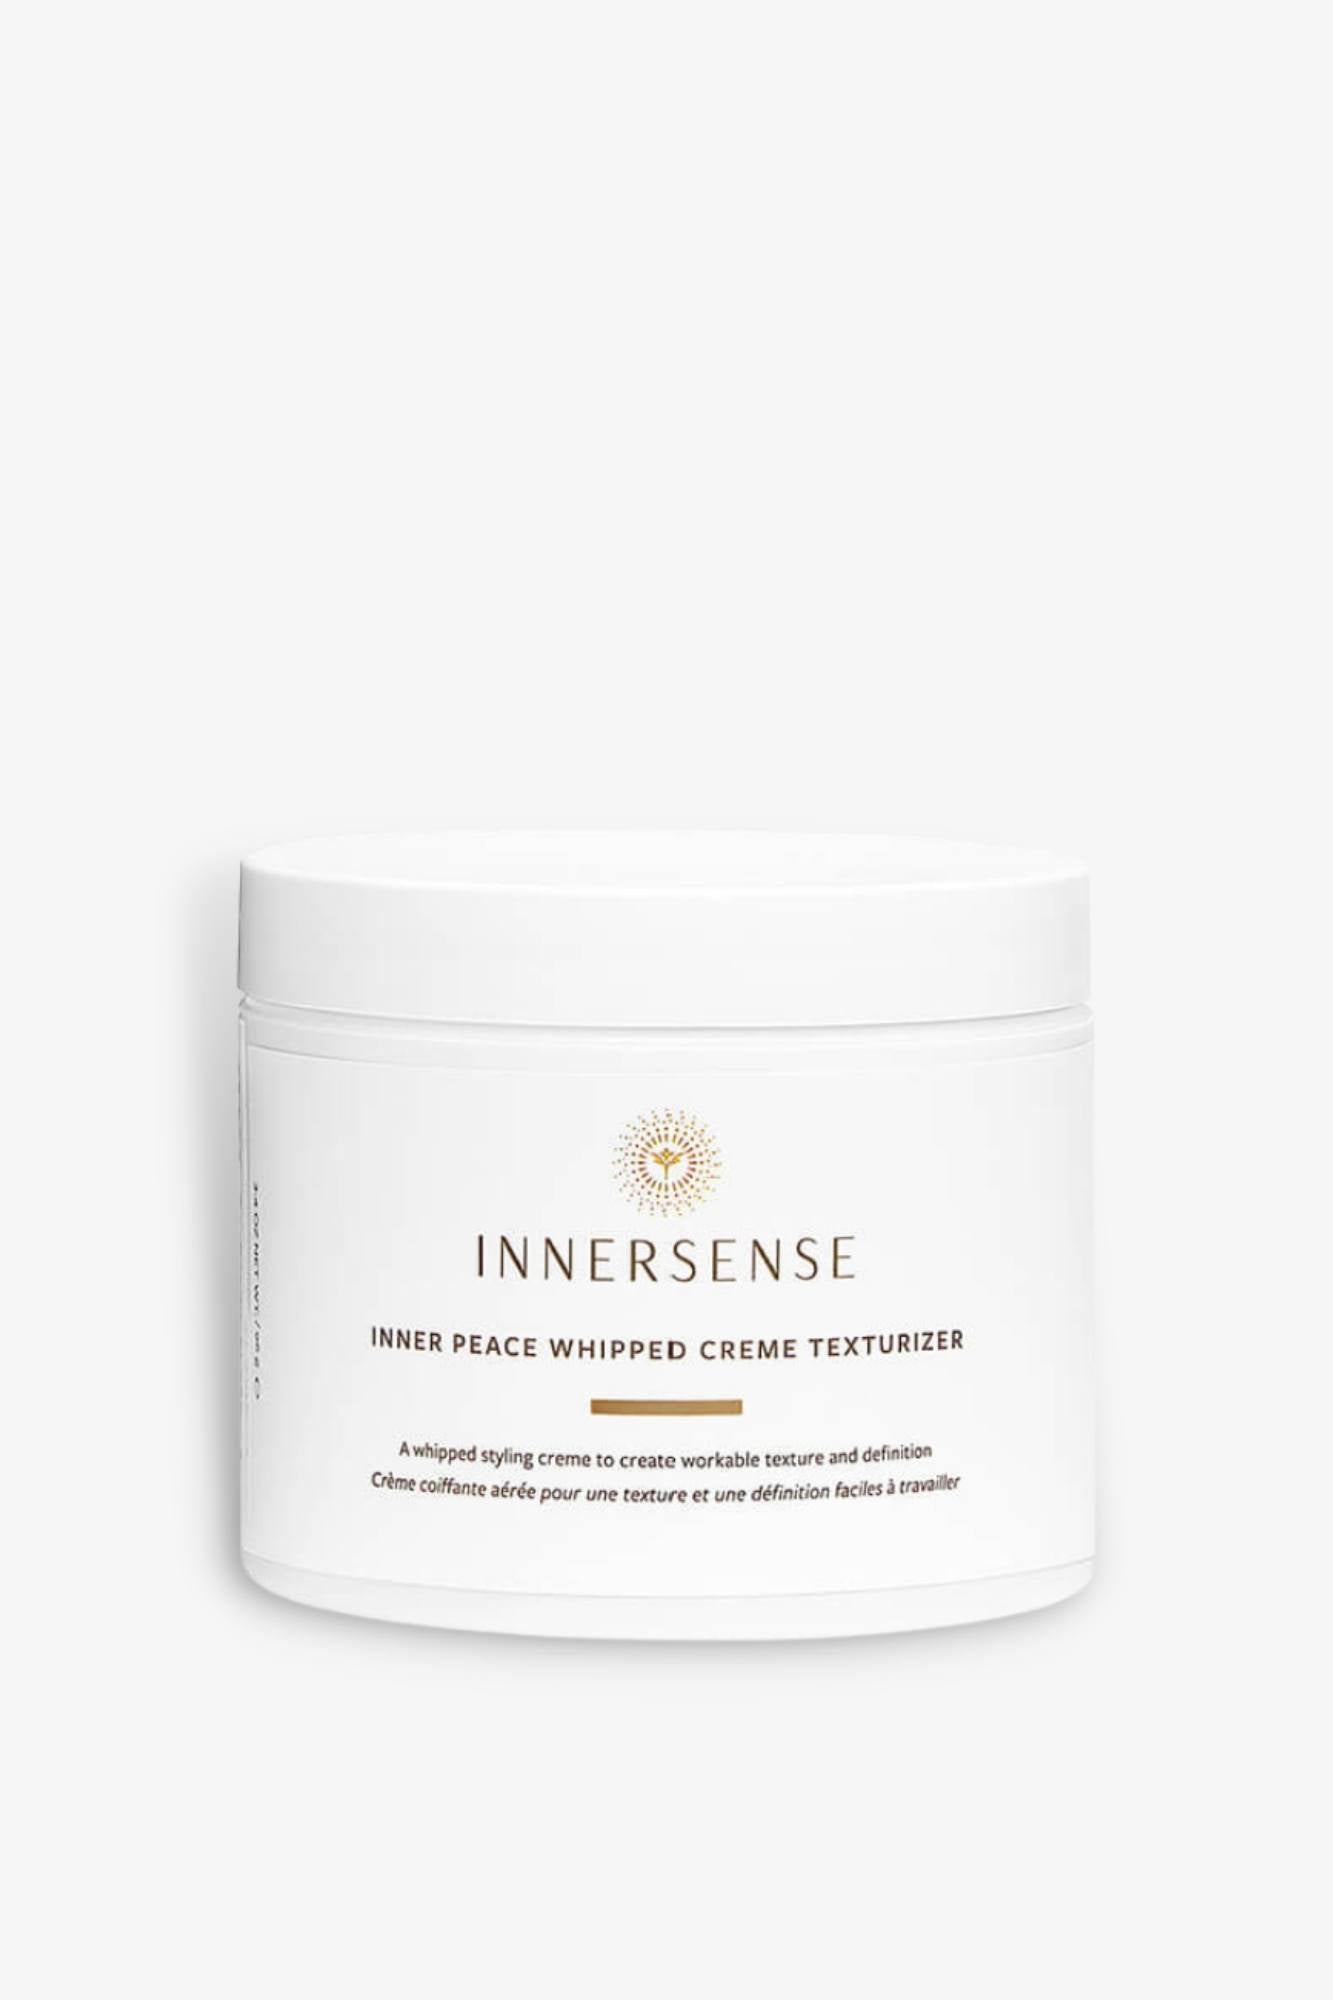 Innersense - Inner Peace Whipped Crème Texturizer - 96g